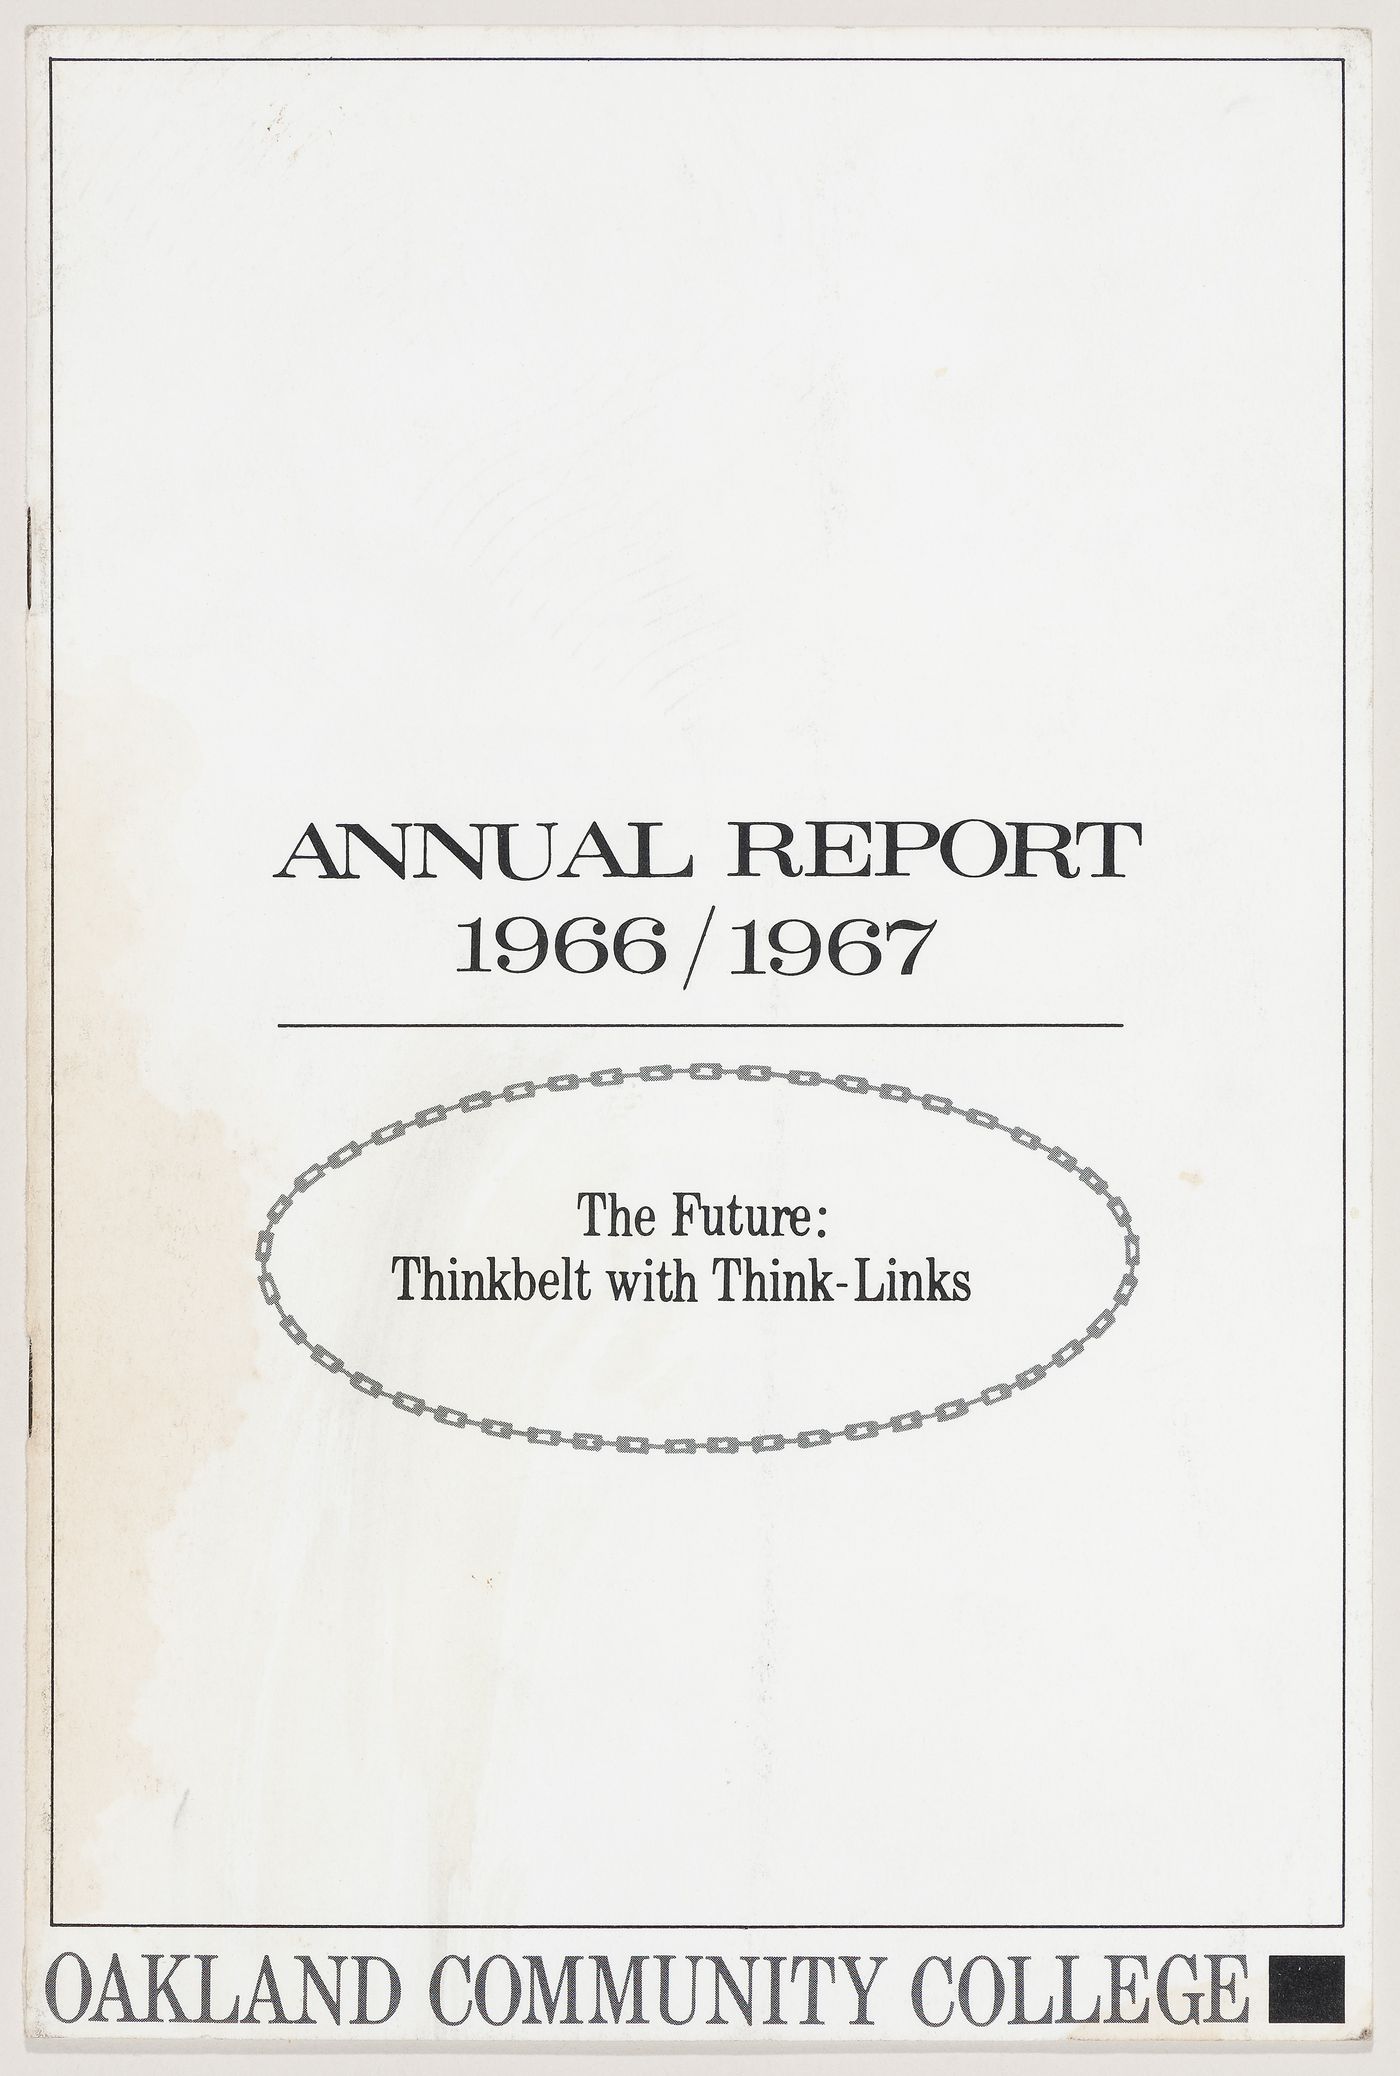 Oakland Community College Annual Report, 1966-67 [from Detroit Think Grid project documents]